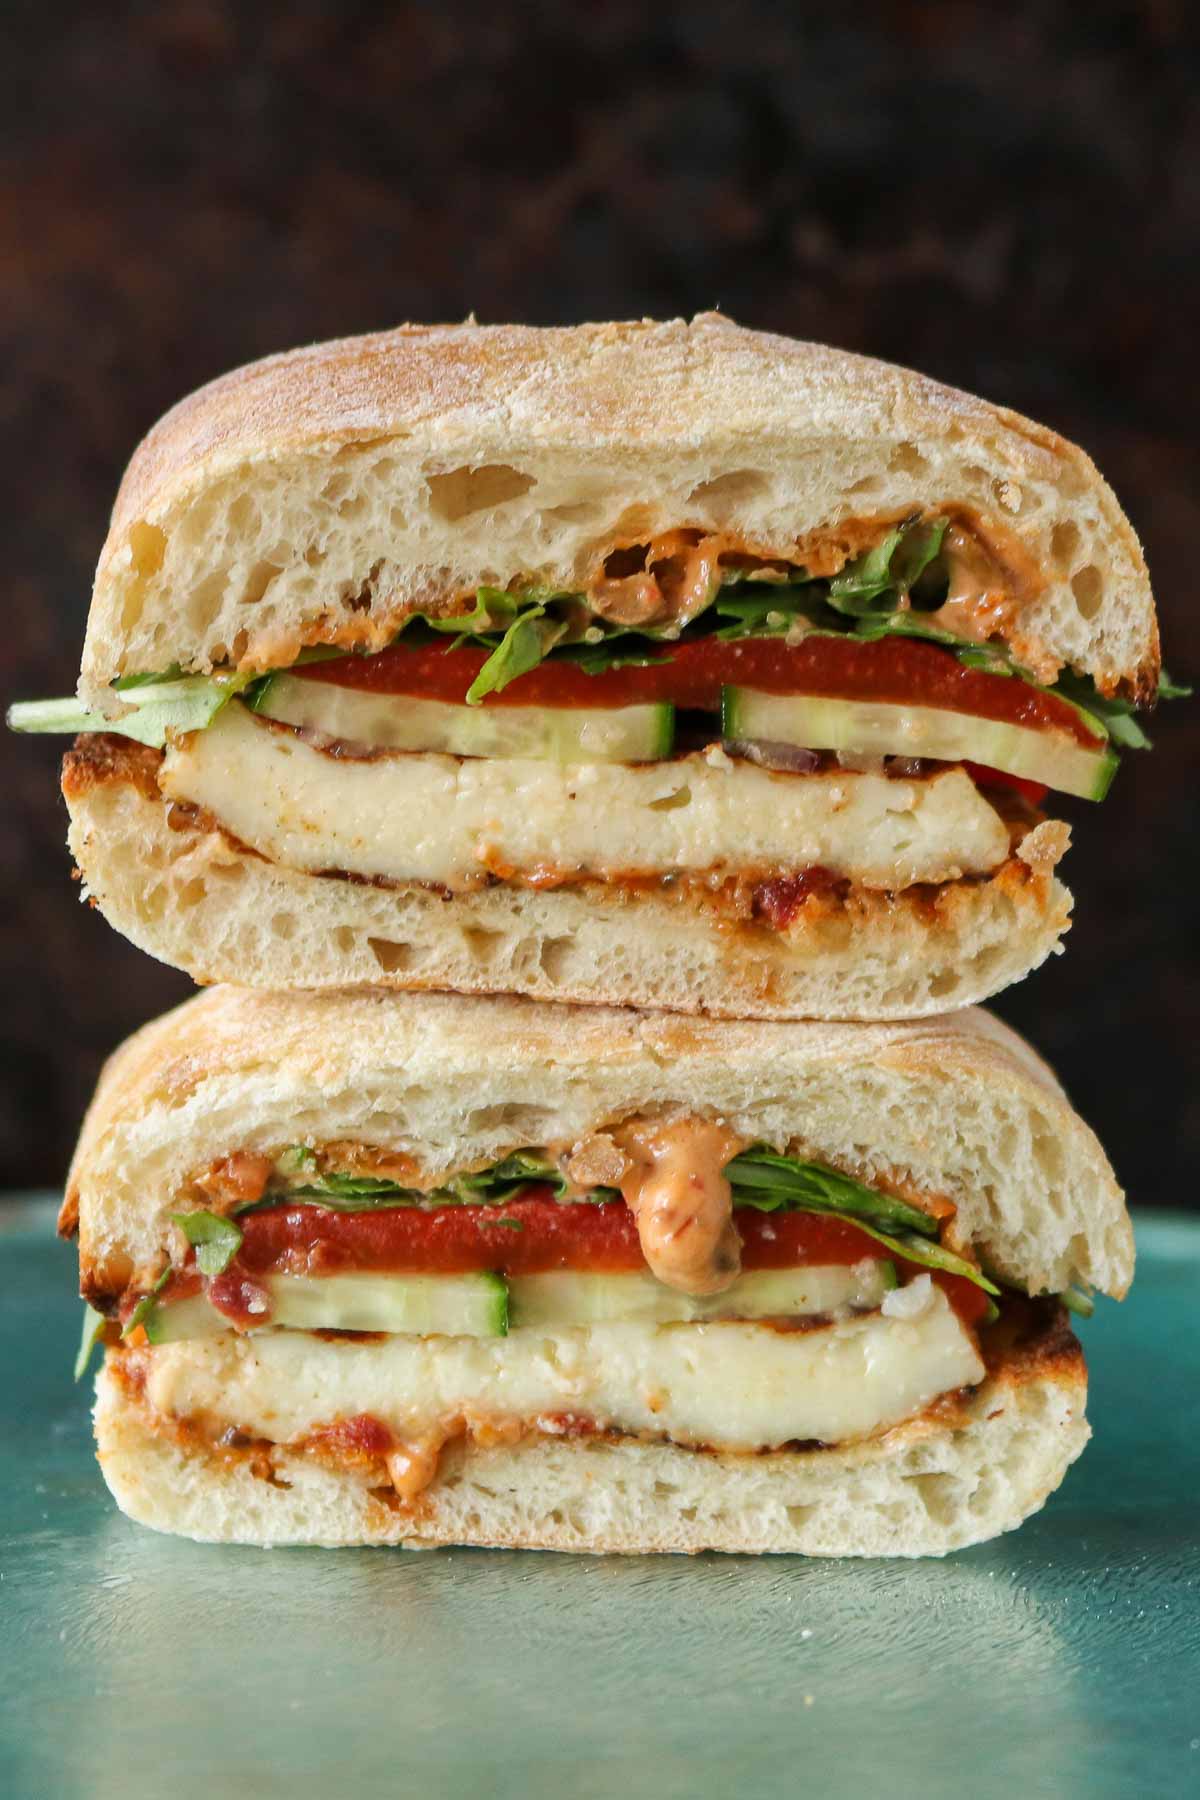 Stack of two halves of a halloumi sandwich.